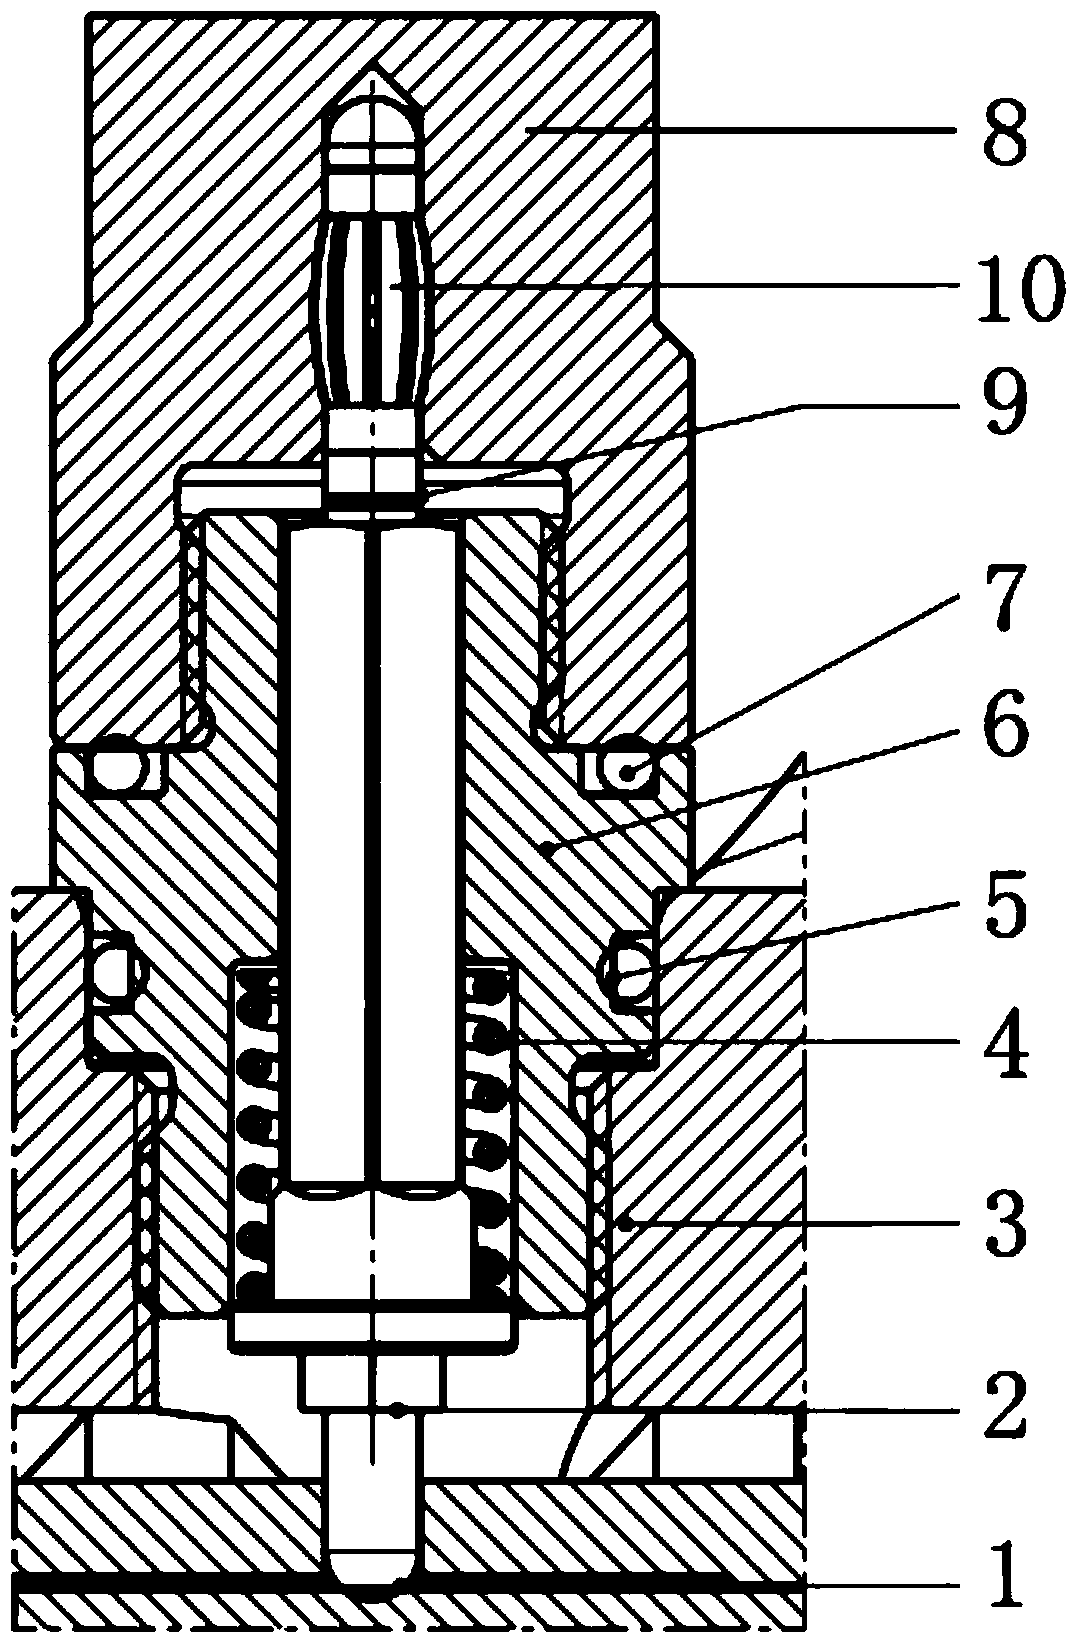 A dry-type transformer bushing end screen lead-out device